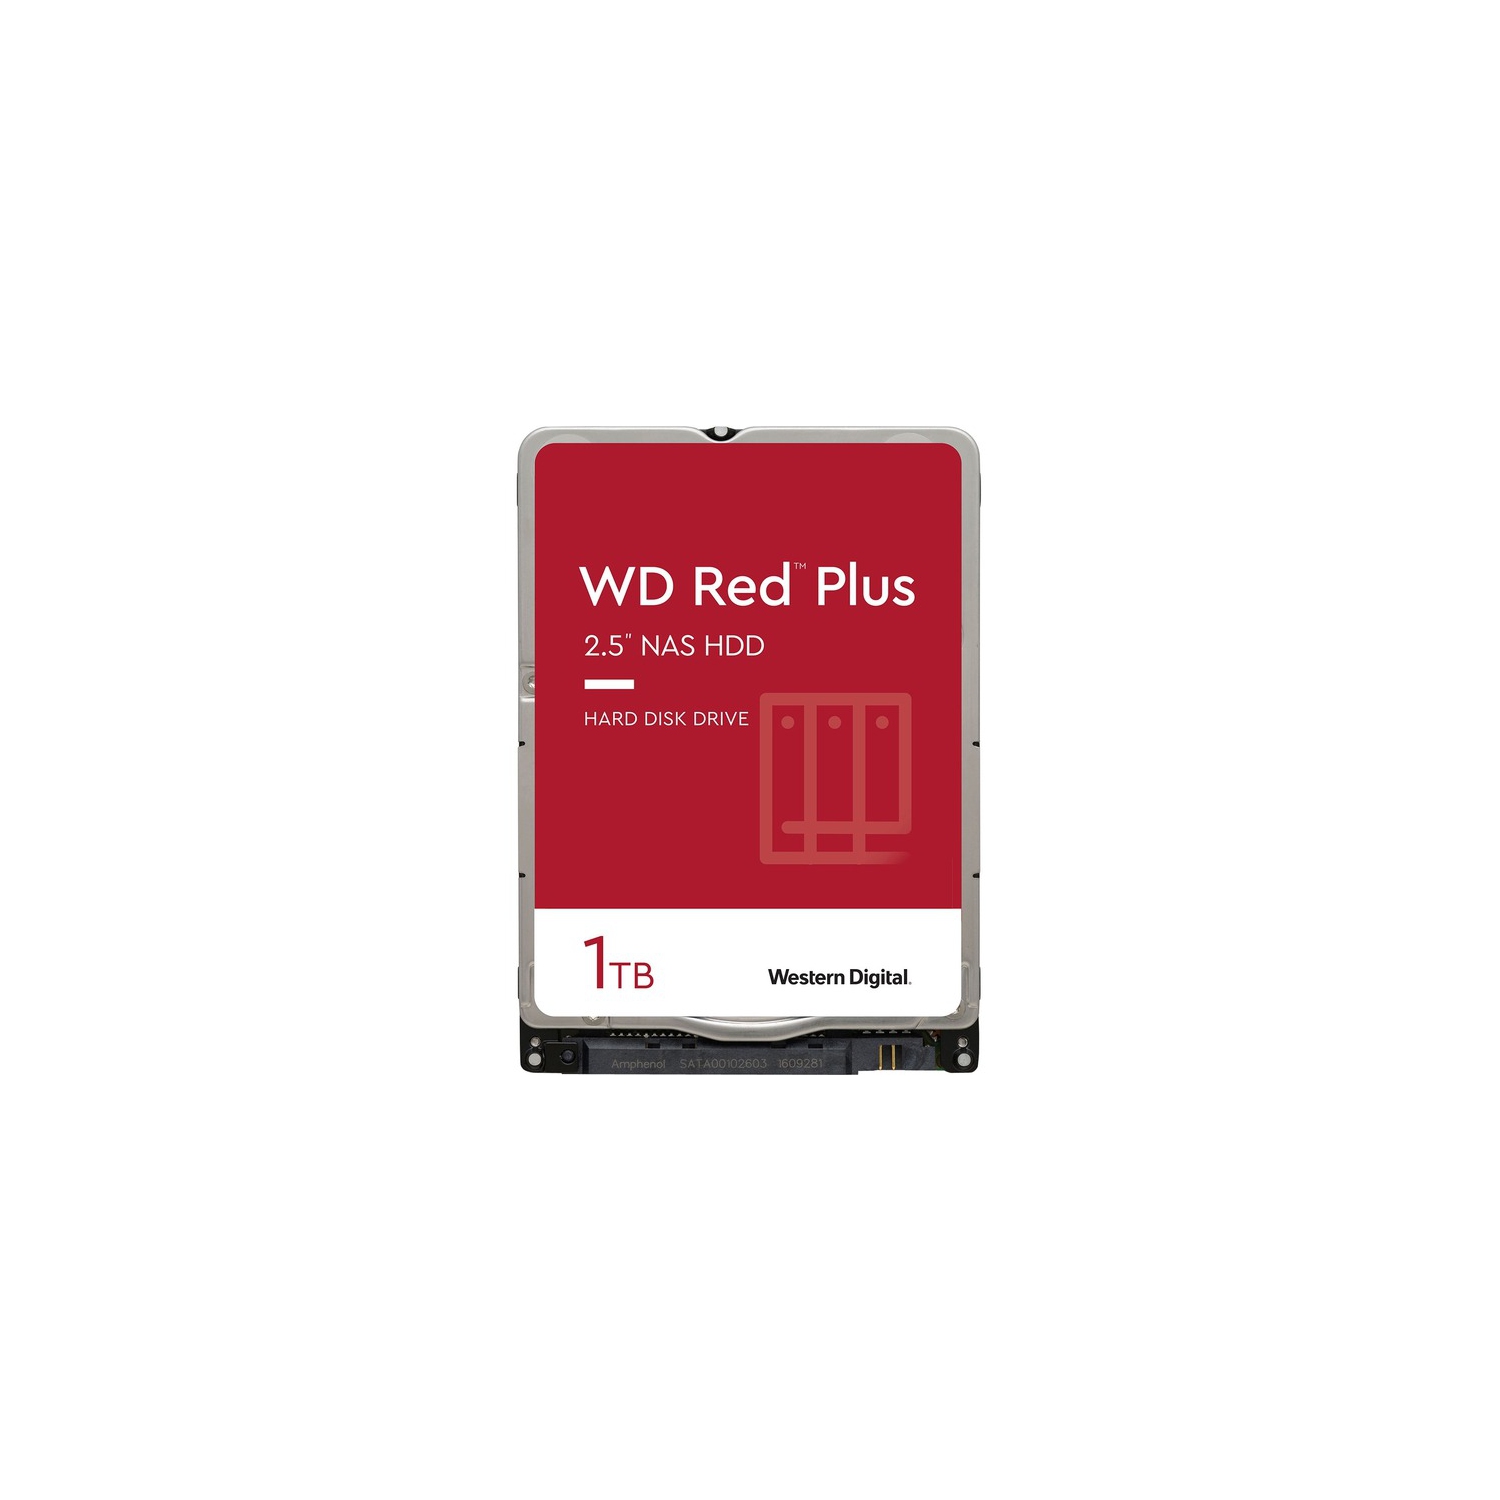 WD Red WD10JFCX 1 TB 2.5